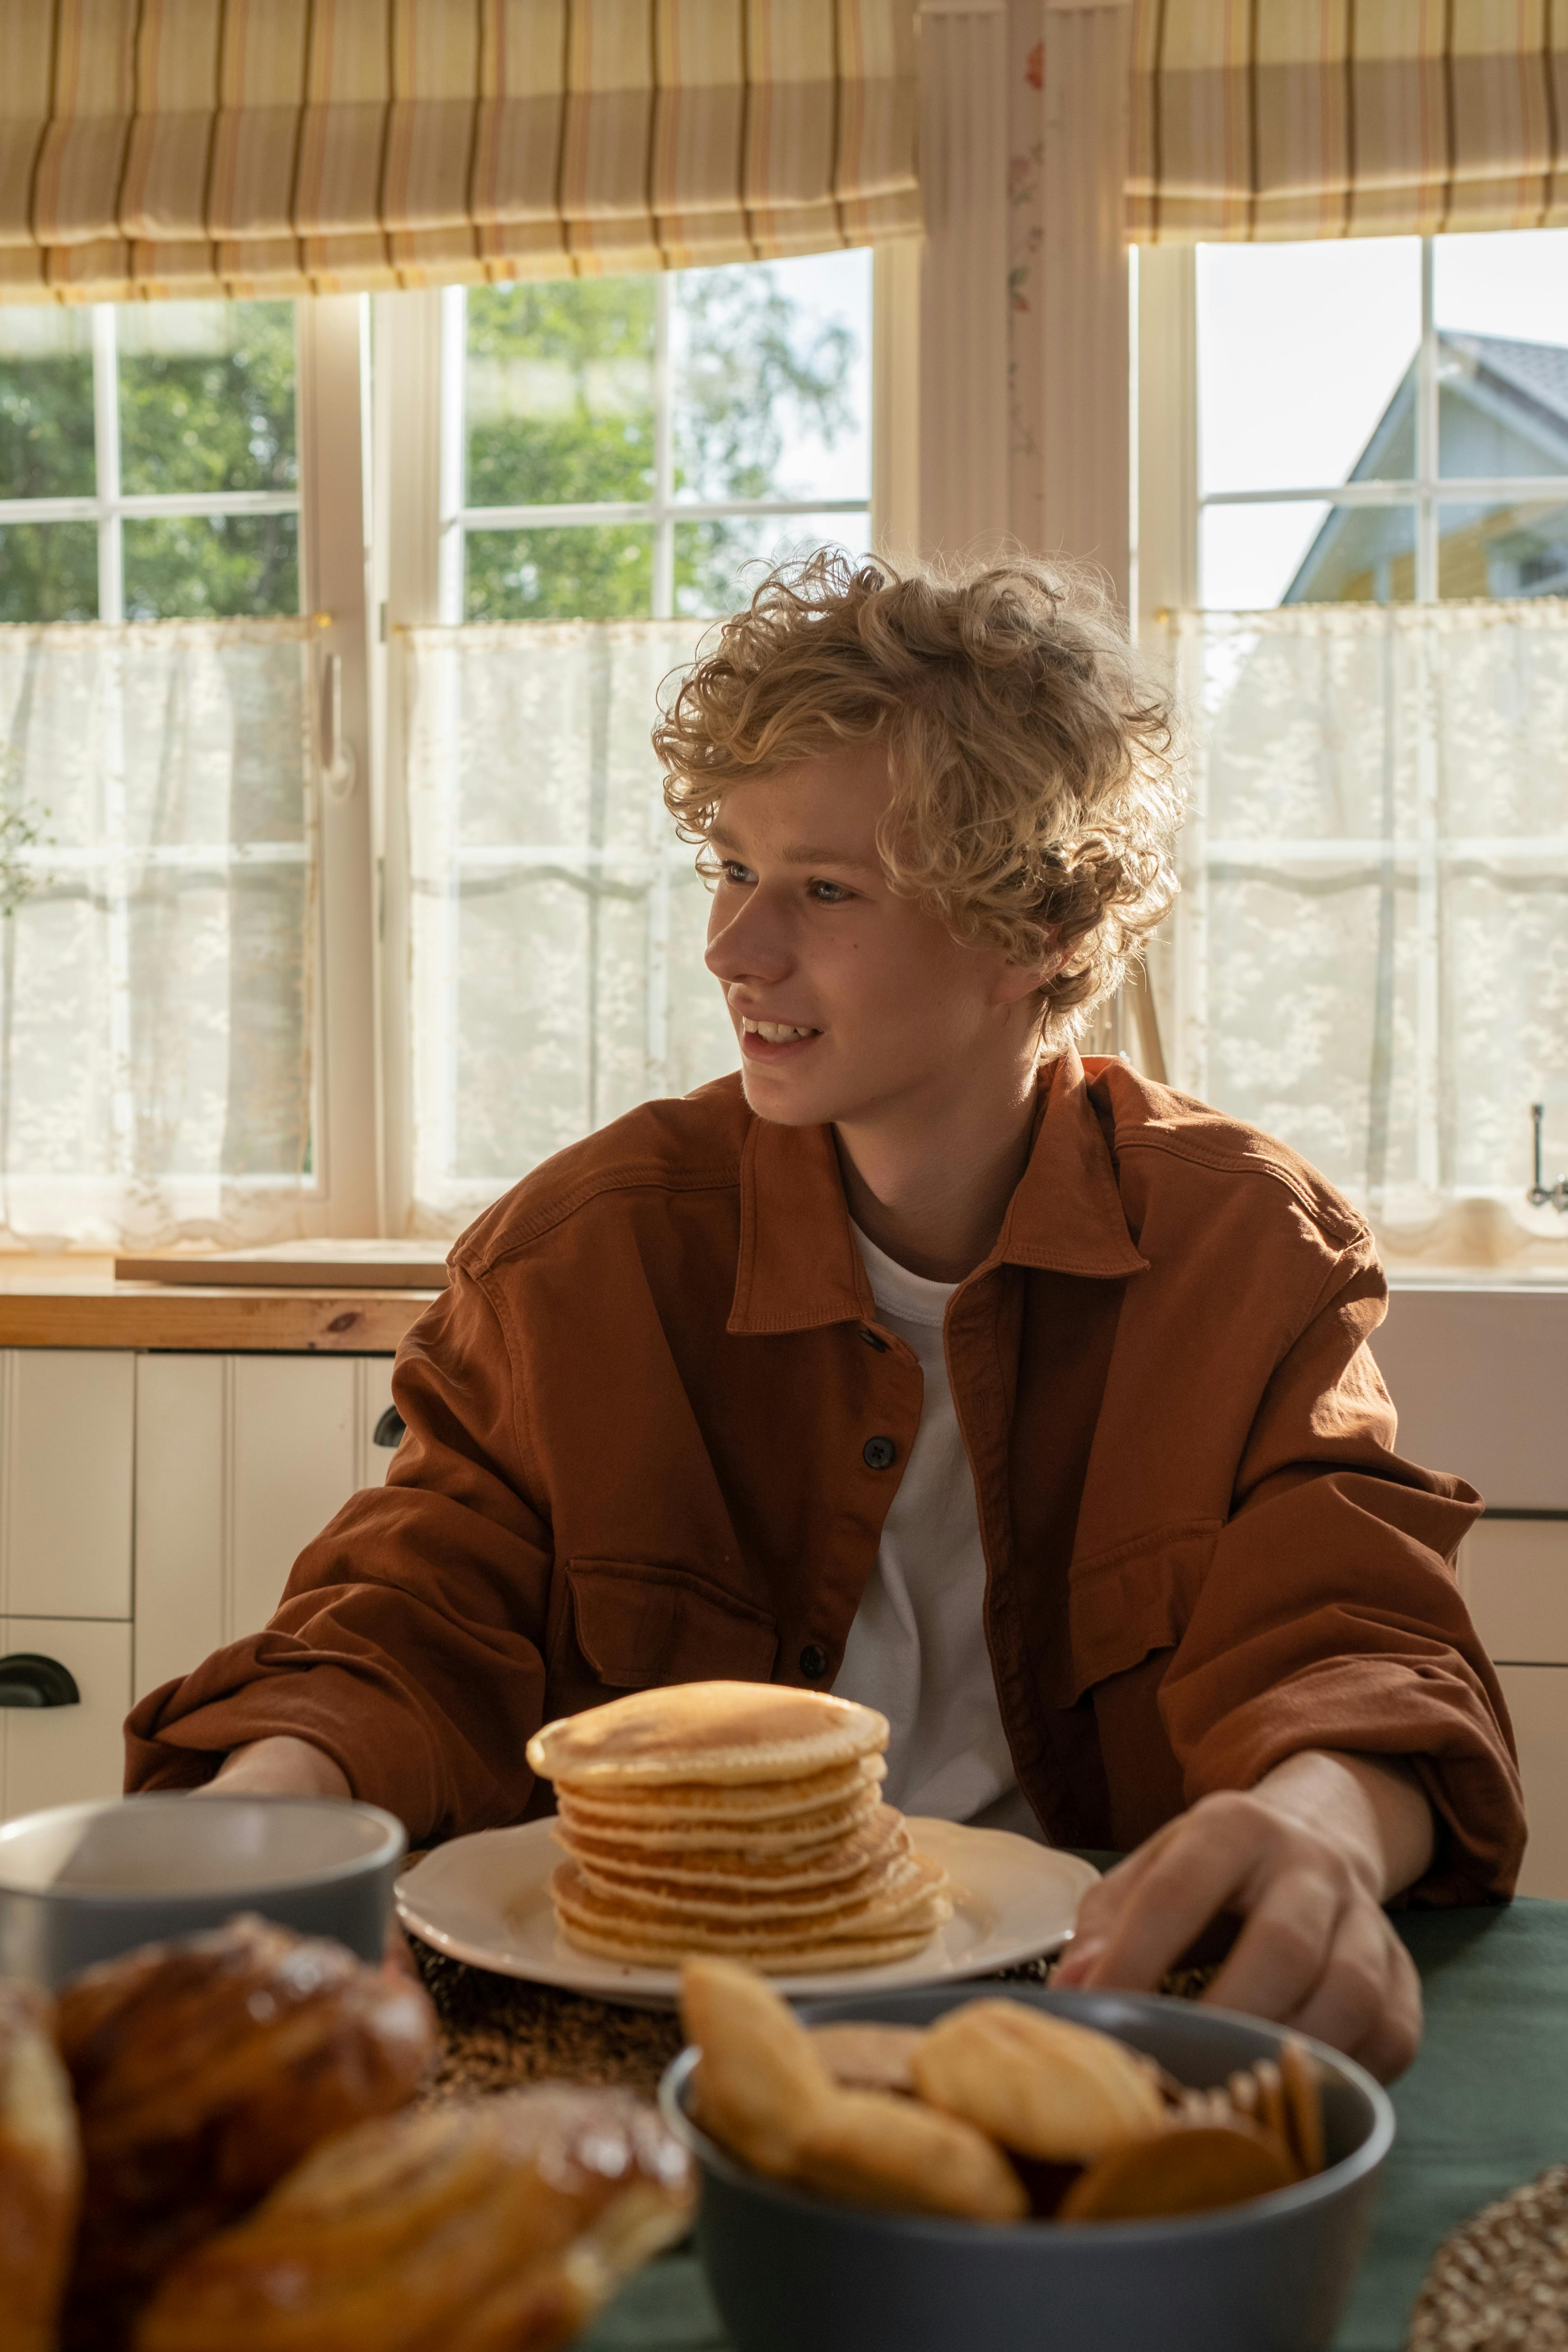 A smiling boy sitting at the table with pancakes in front of him | Source: Pexels